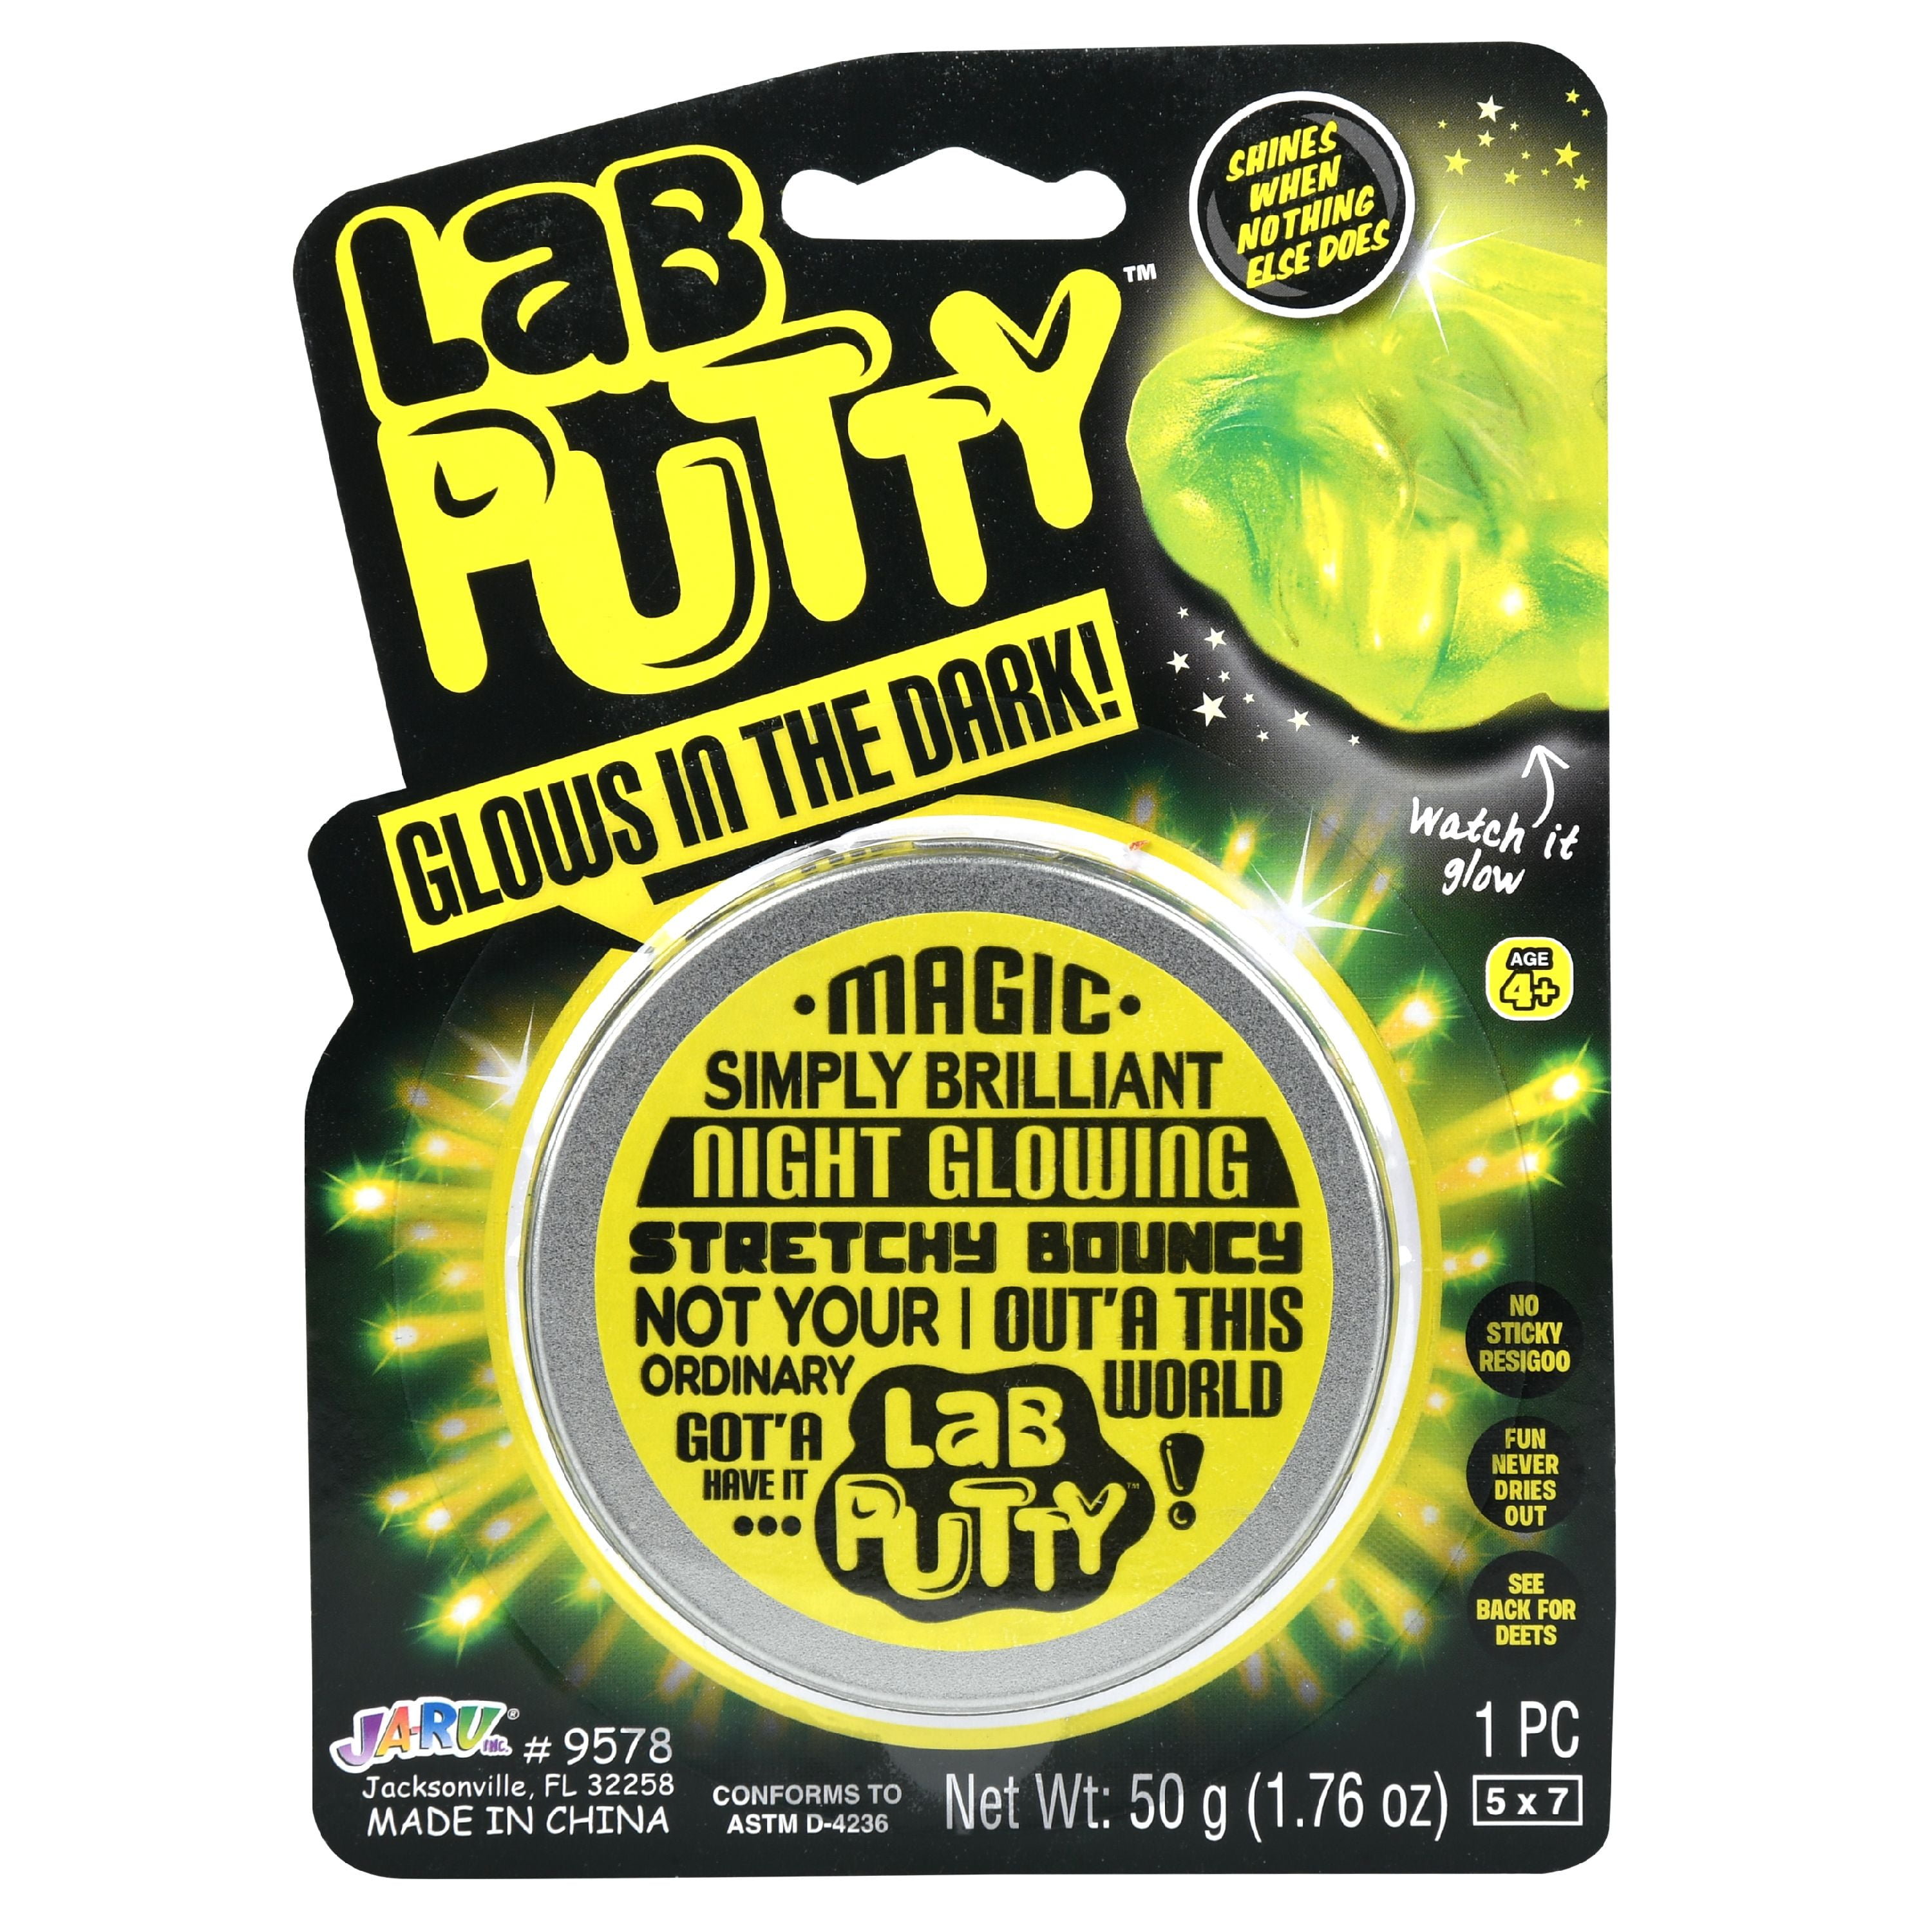 LAB PUTTY Toy Glow in the Dark- Magnate Sculpting Glass LED Scribbler NEW 